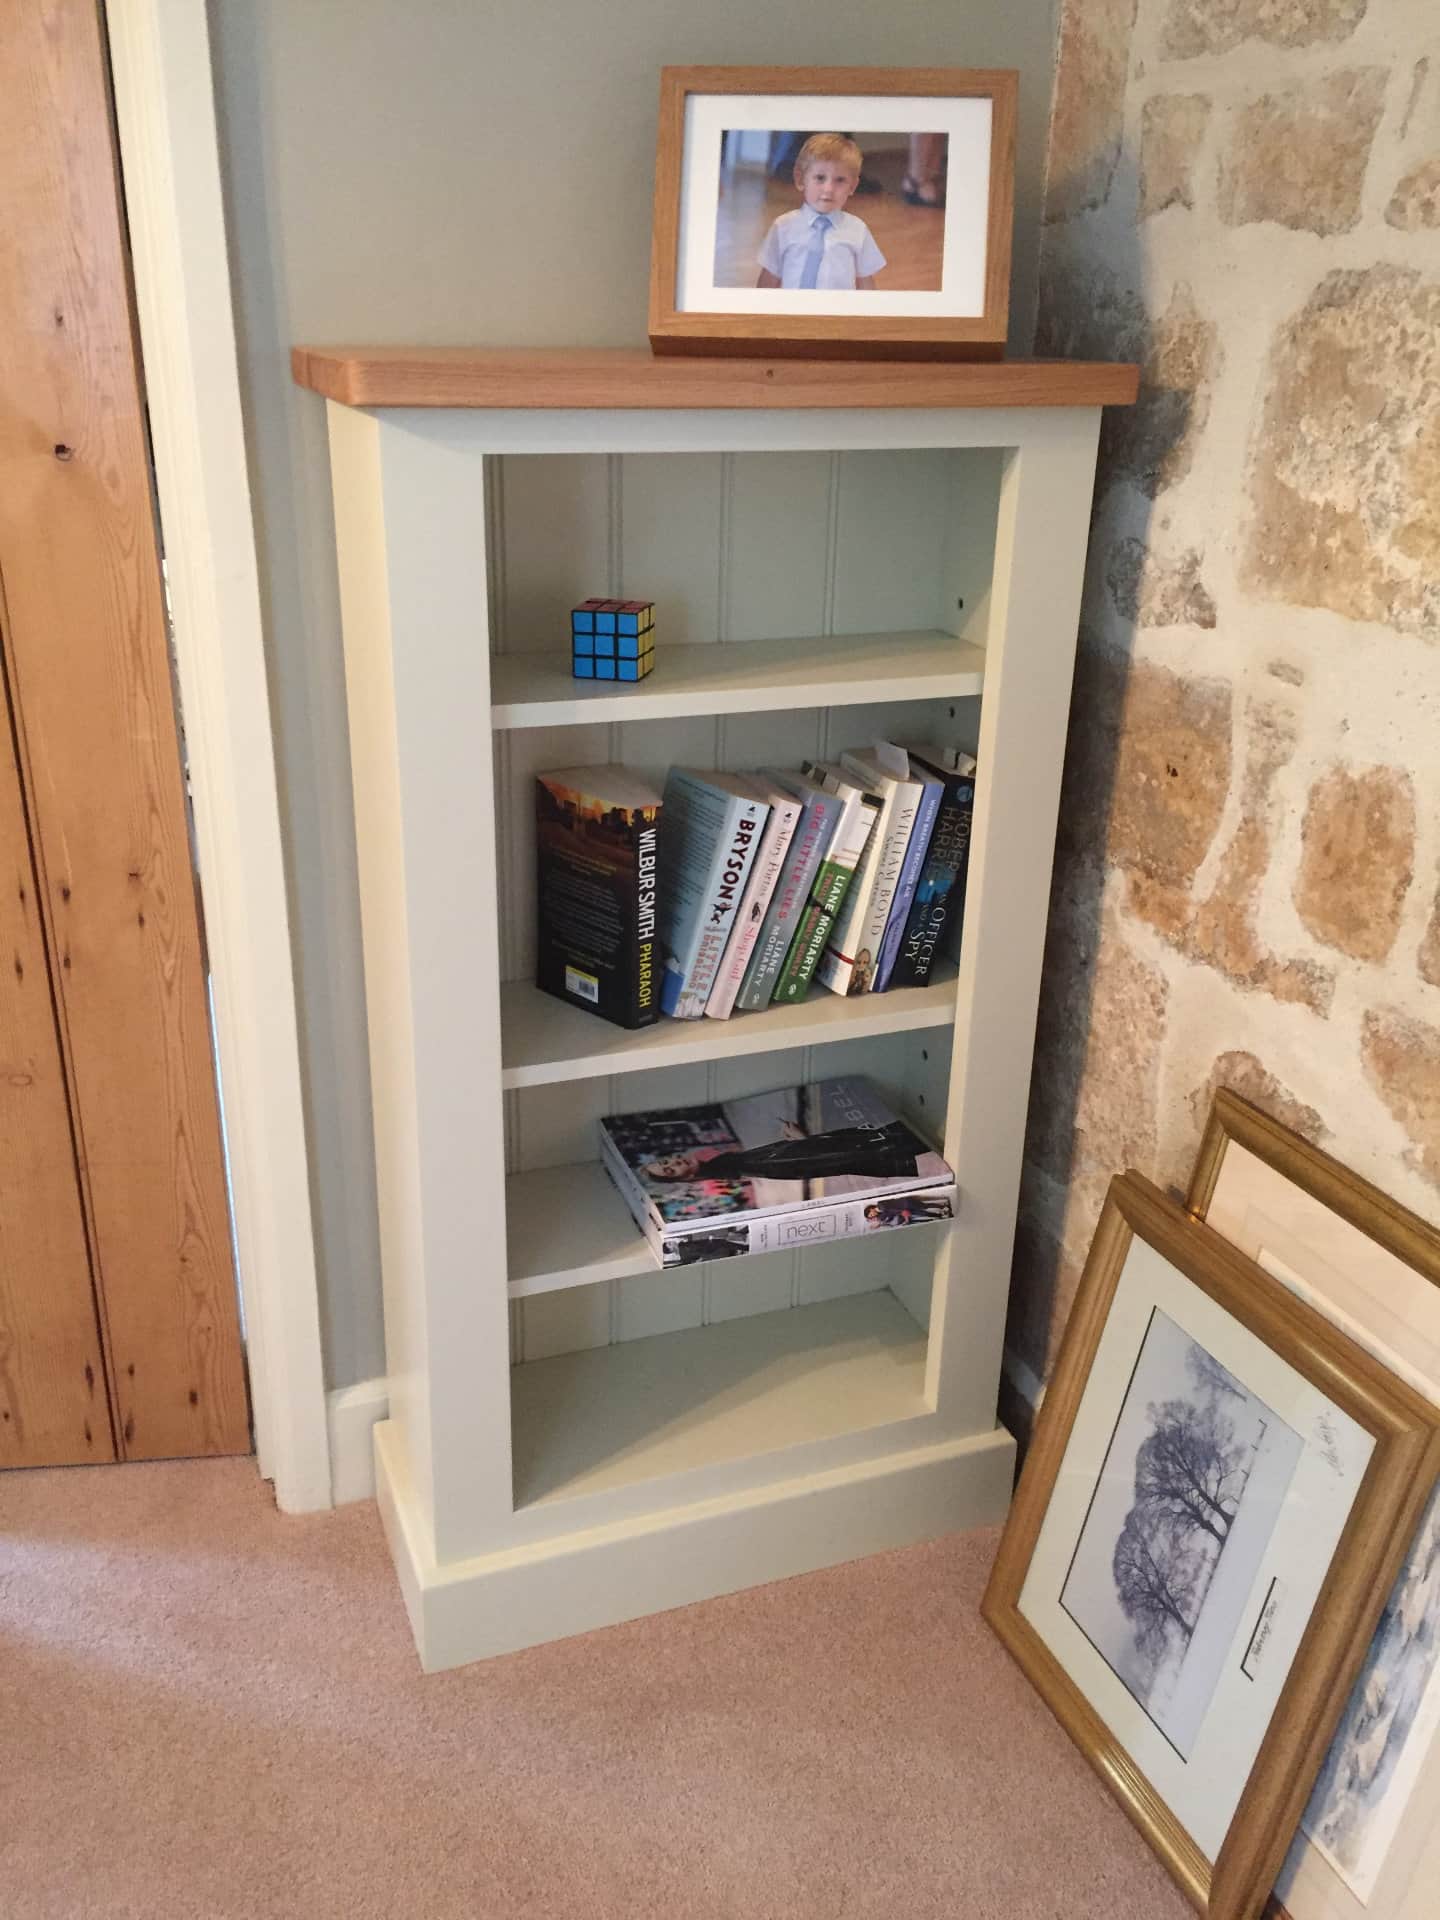 A bespoke bookcase with an assortment of books on it